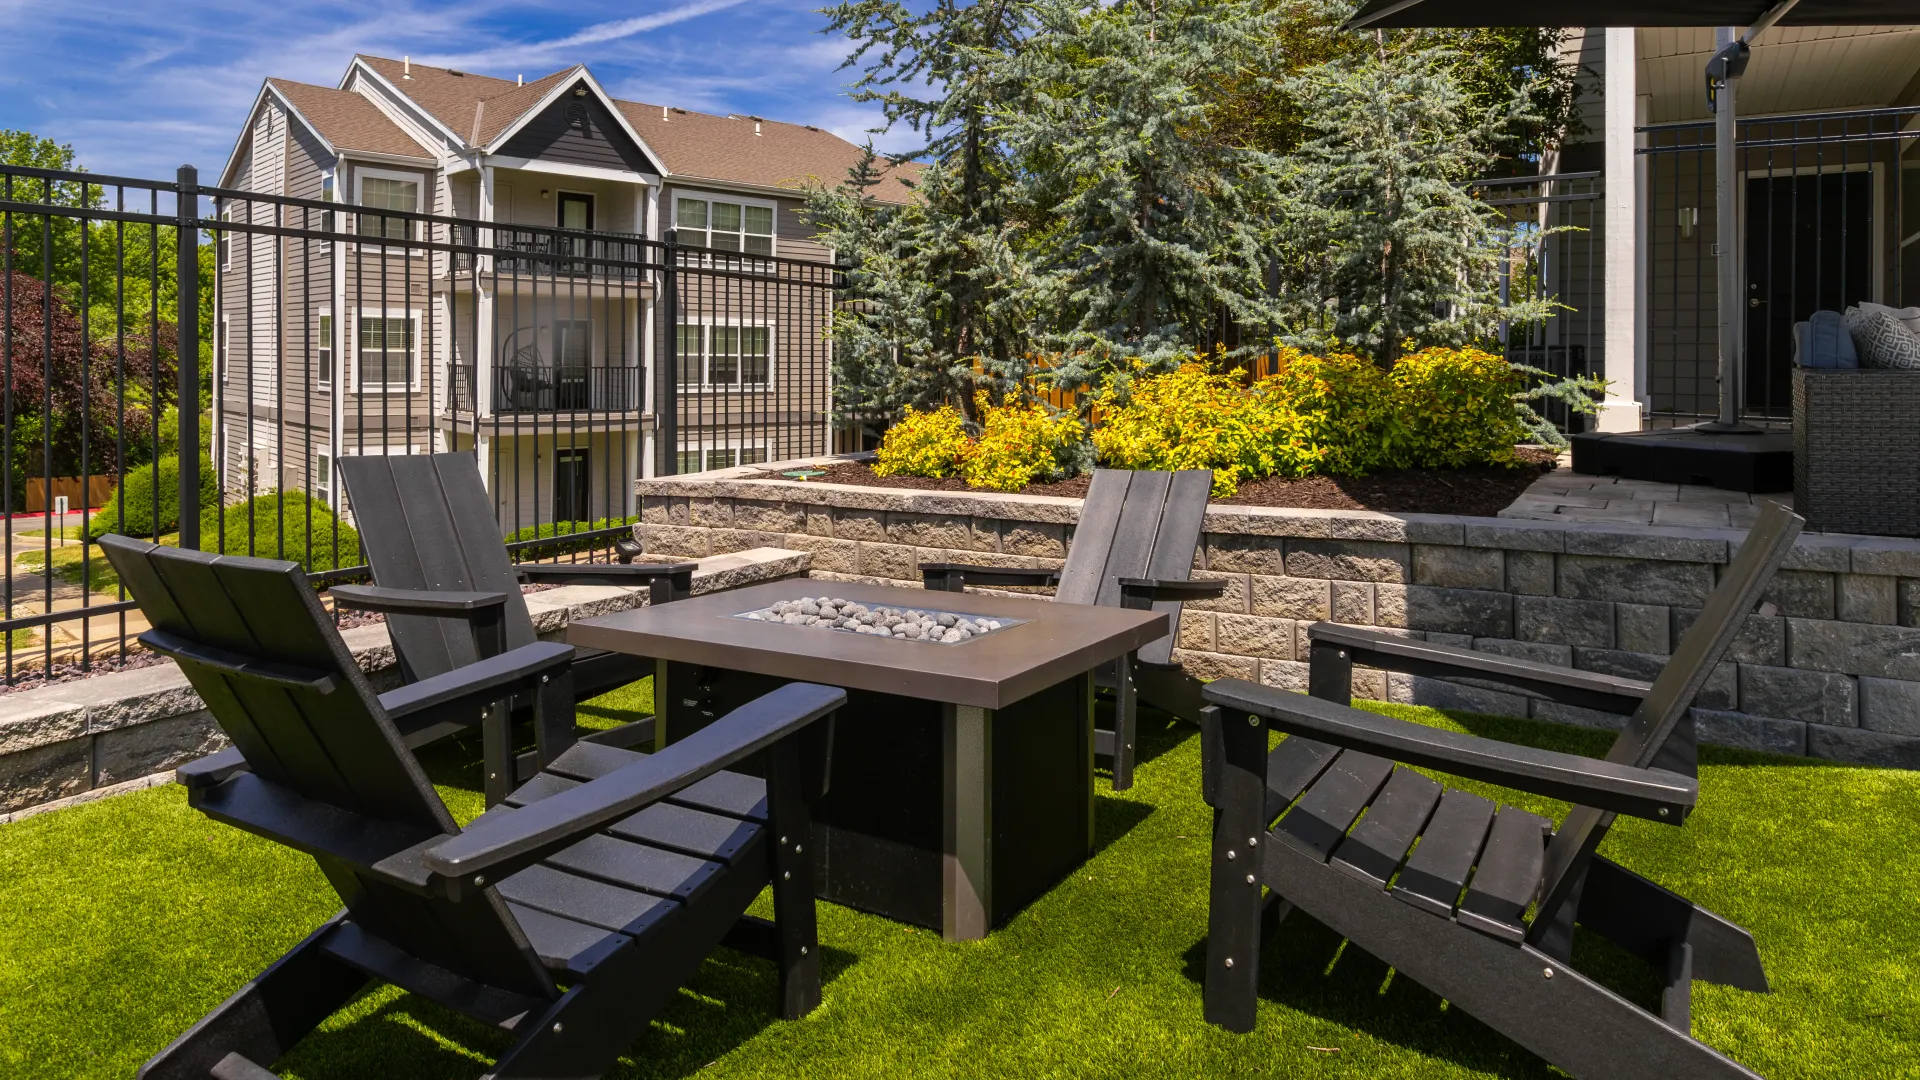 Outdoor fire pit area with black Adirondack chairs, surrounded by lush greenery and adjacent to an apartment building.